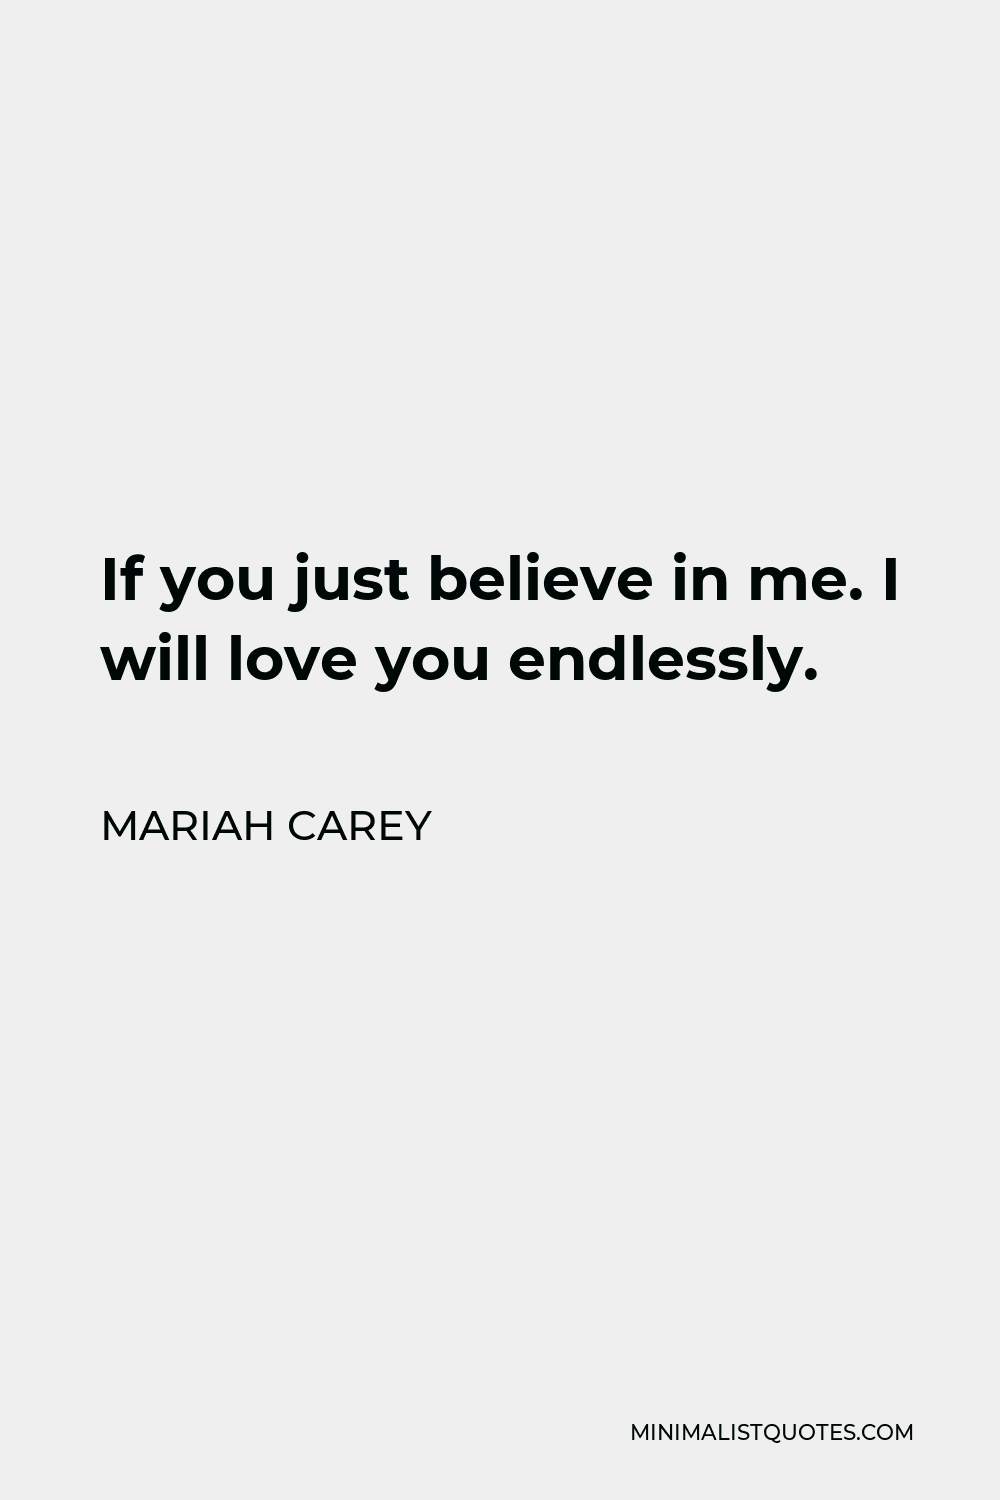 Mariah Carey Quote - If you just believe in me. I will love you endlessly.